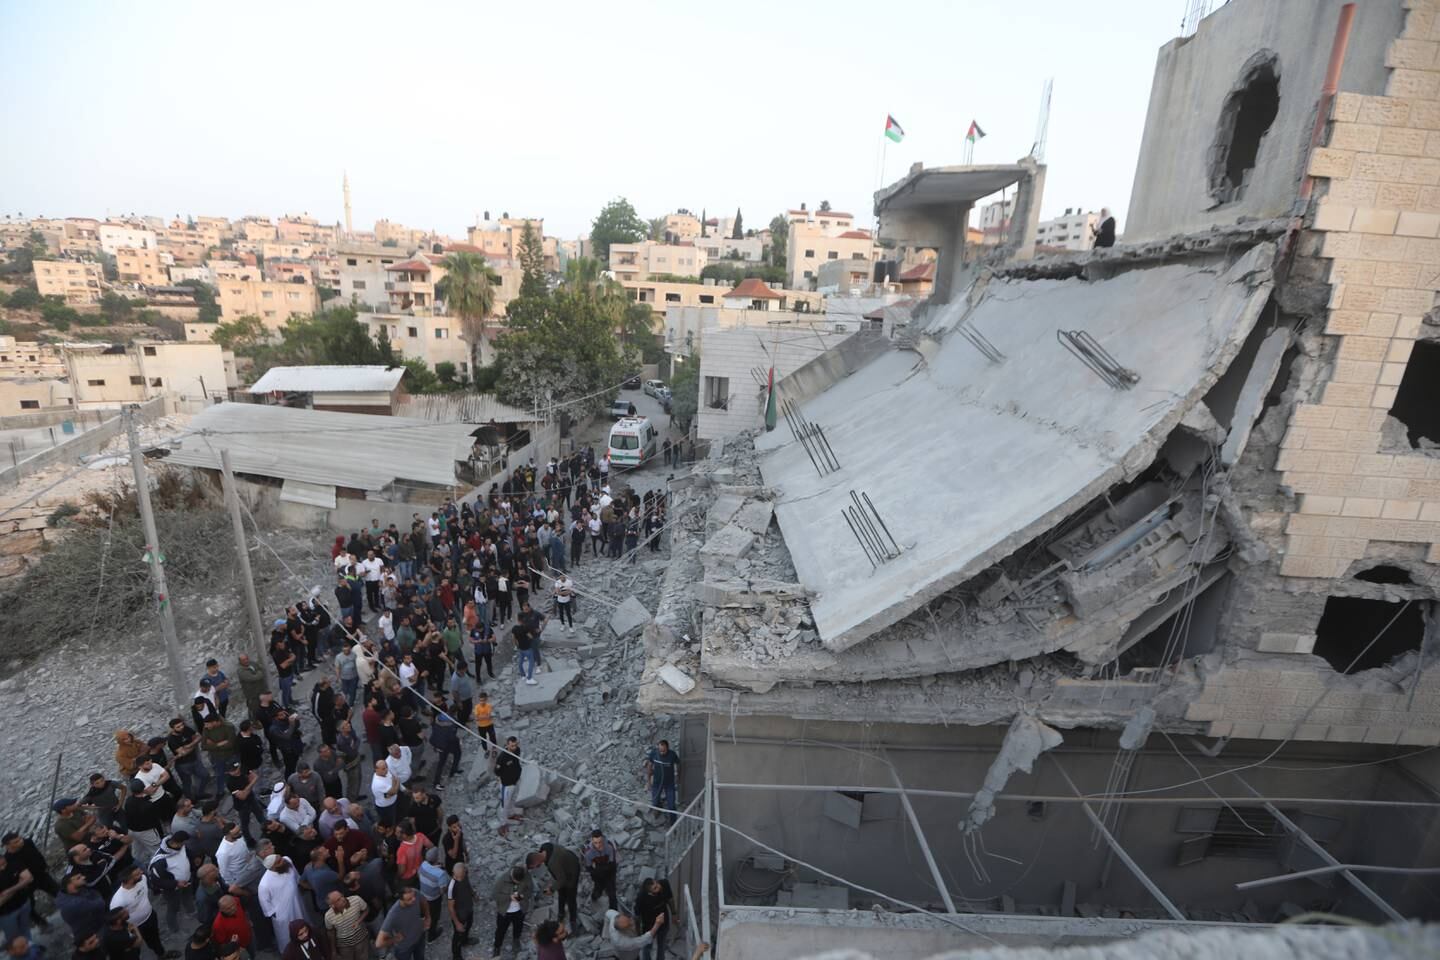 Palestinians check damage to a building after the Israeli army demolished a house in the West Bank. EPA